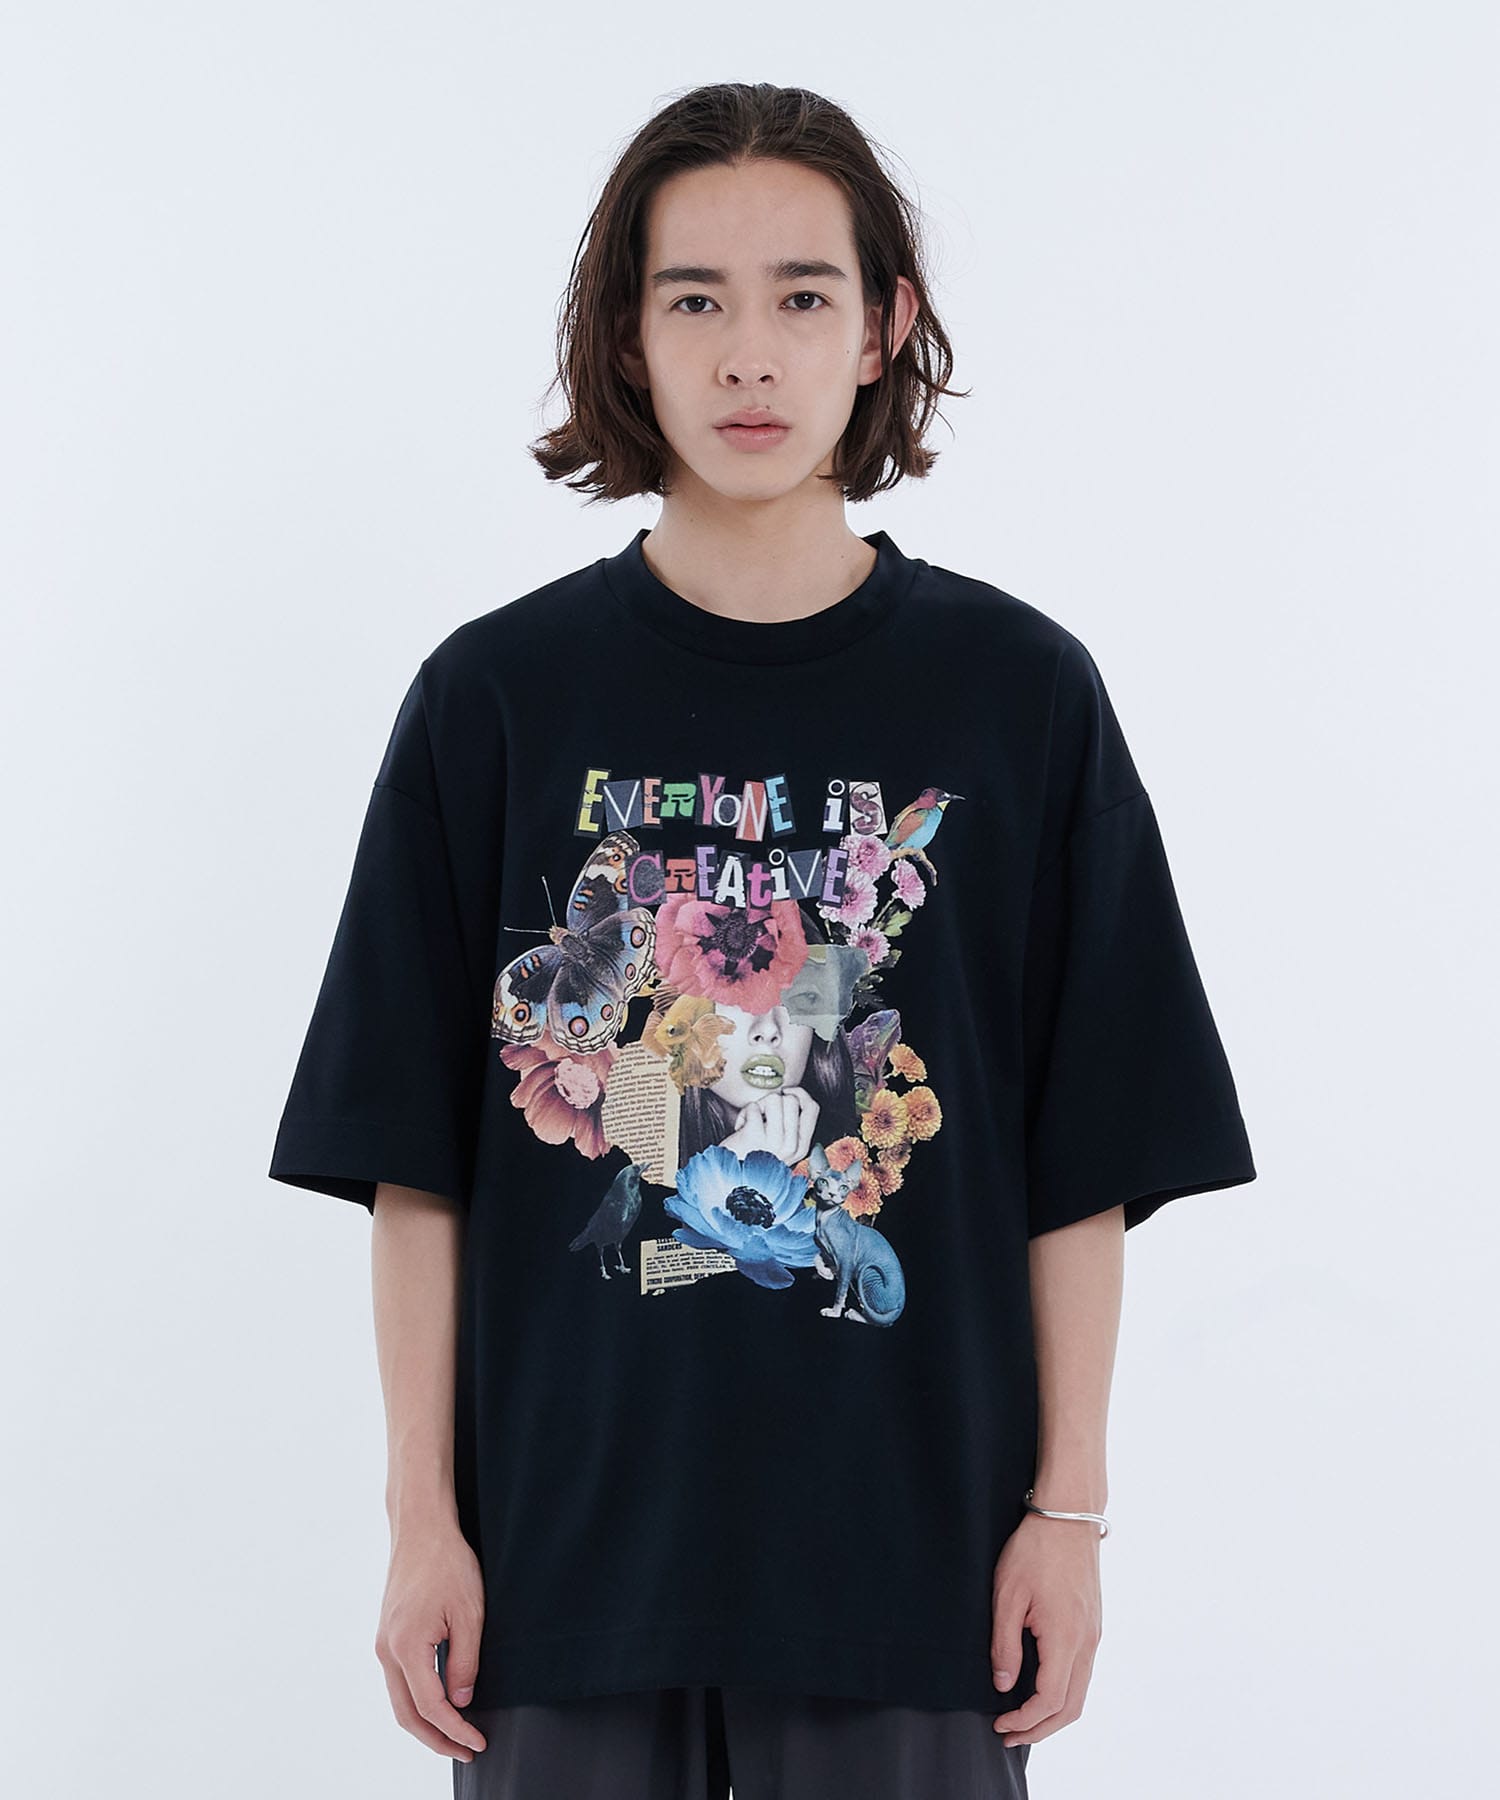 A+TOKYO Tシャツ・カットソーの商品ページ